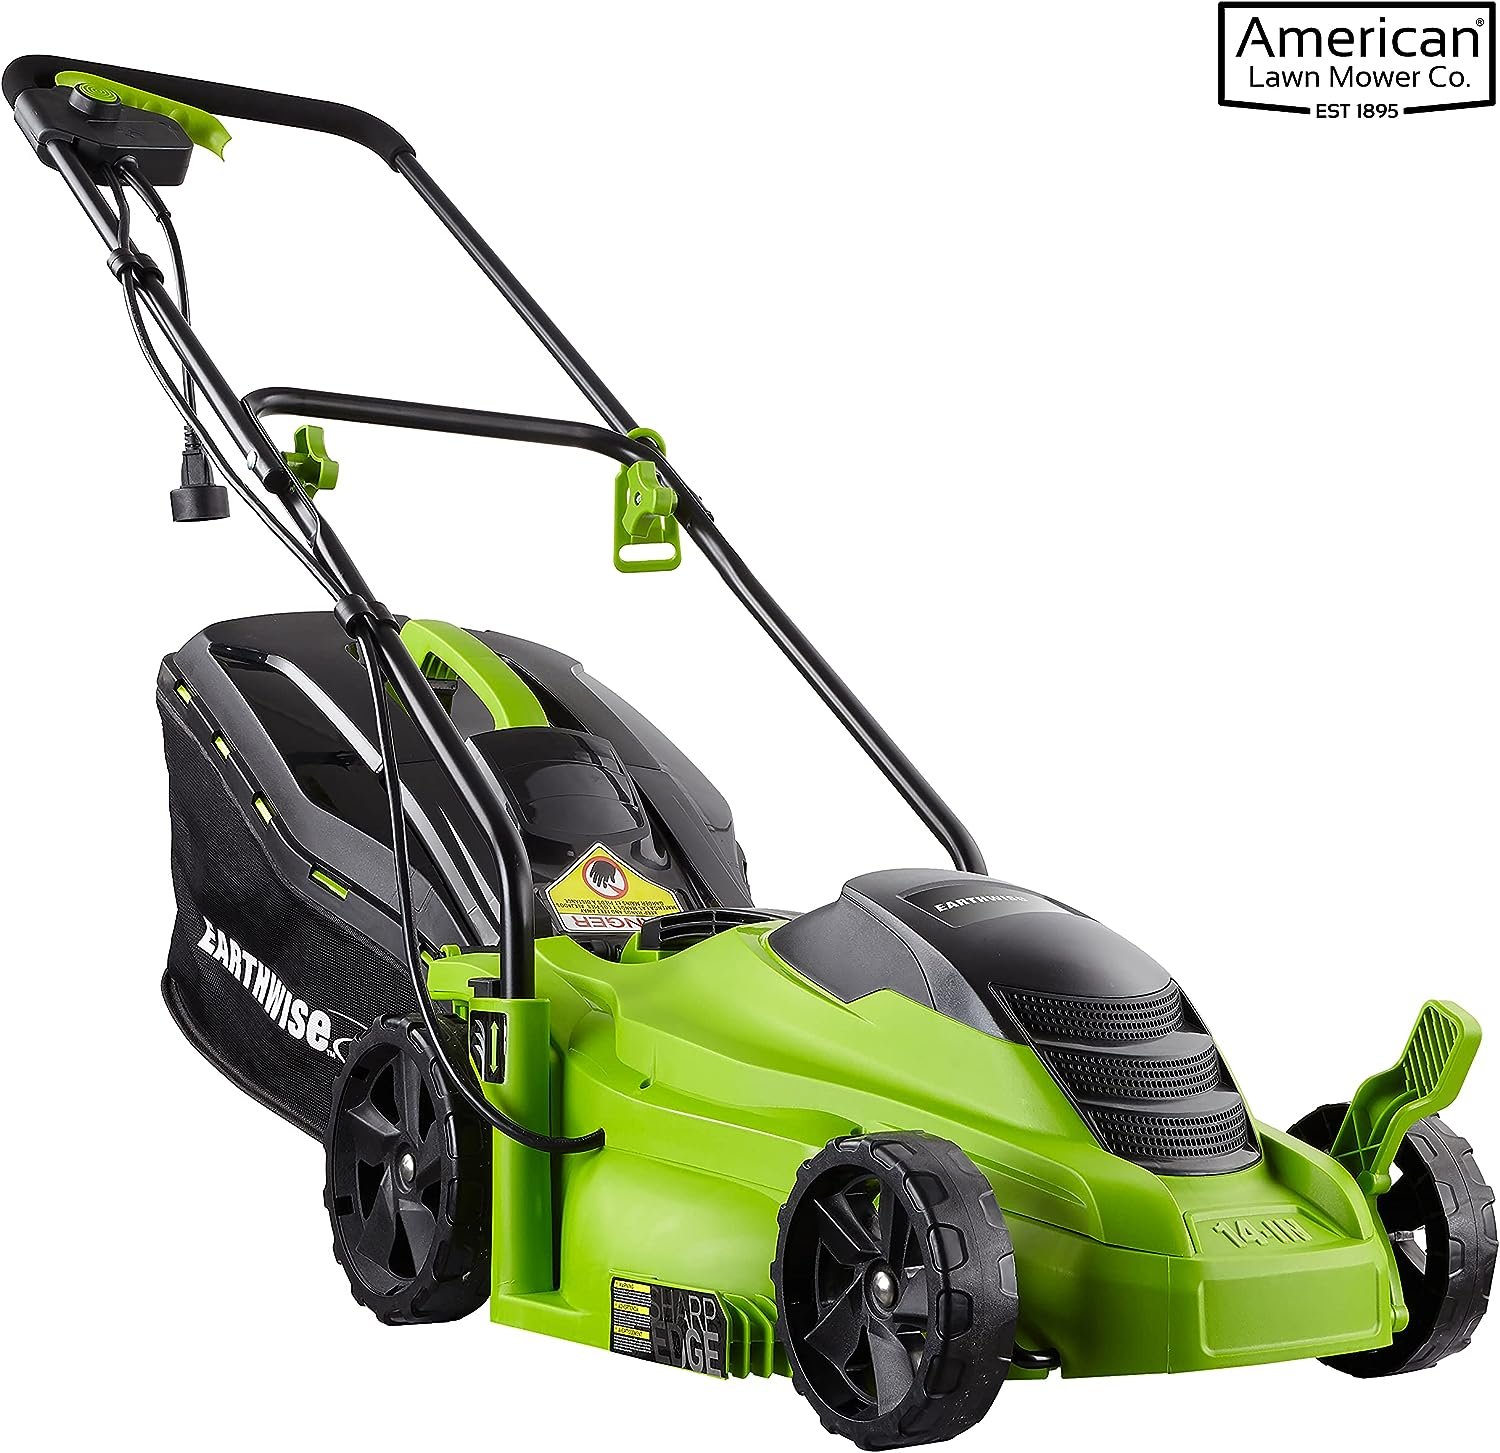 Earthwise 50614 Electric Lawn Mower Review